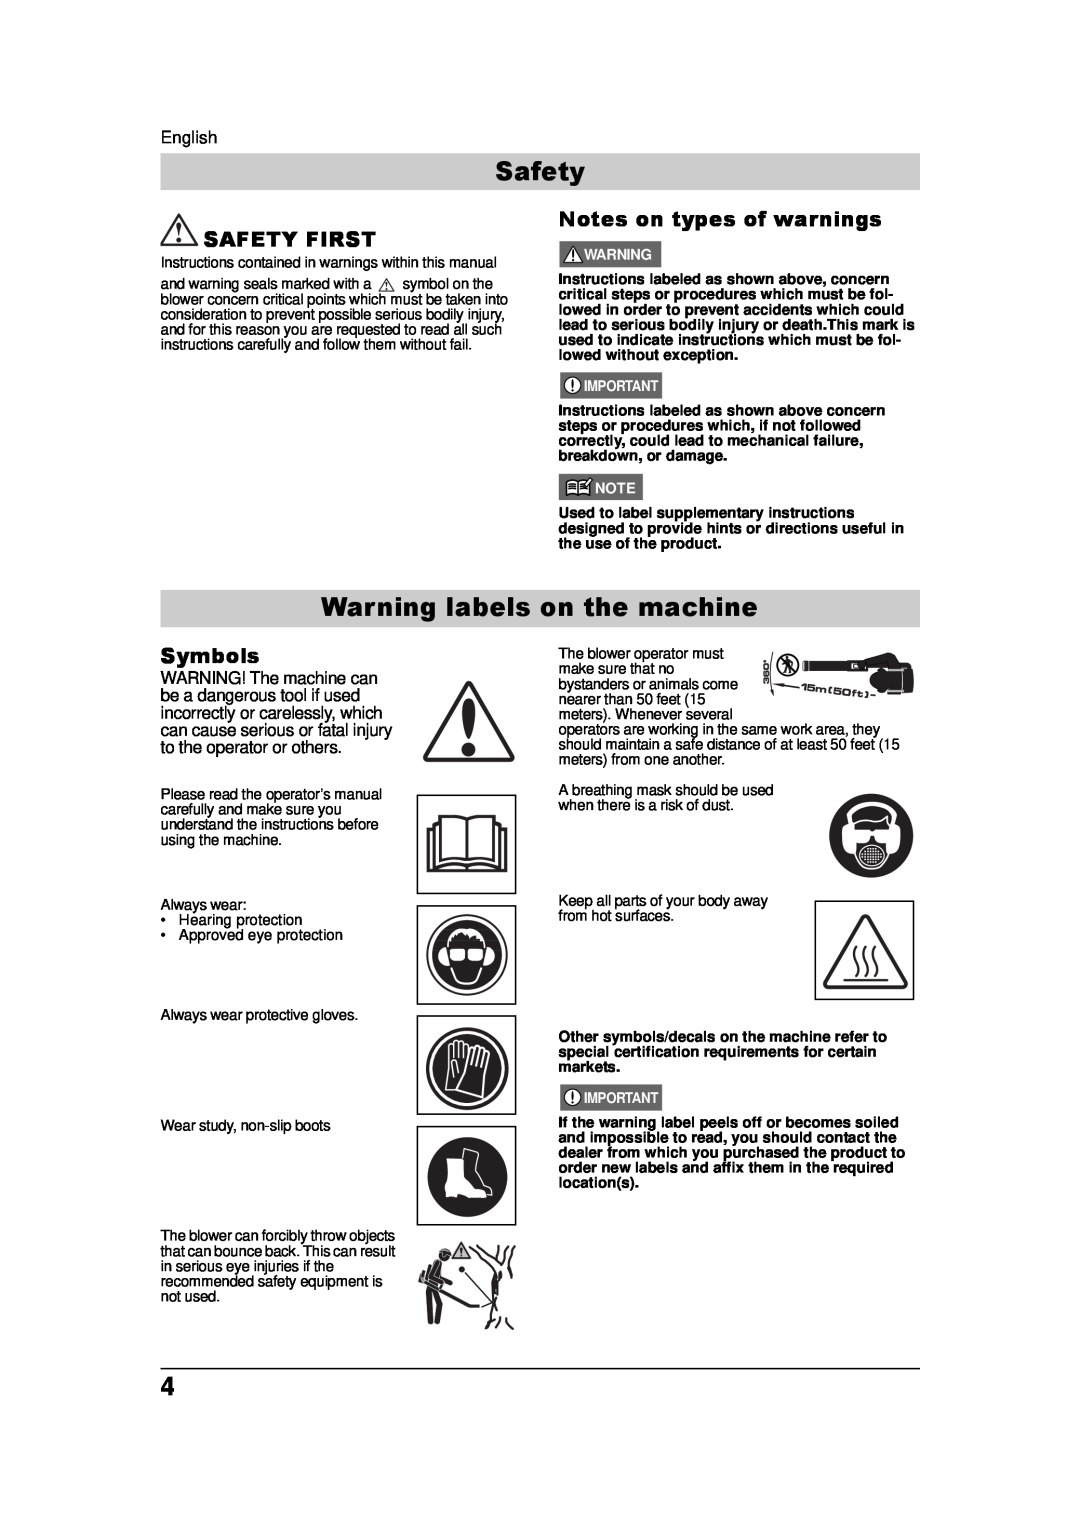 Husqvarna 115 09 83-95, 150BF, 180BF Warning labels on the machine, Safety First, Notes on types of warnings, Symbols 